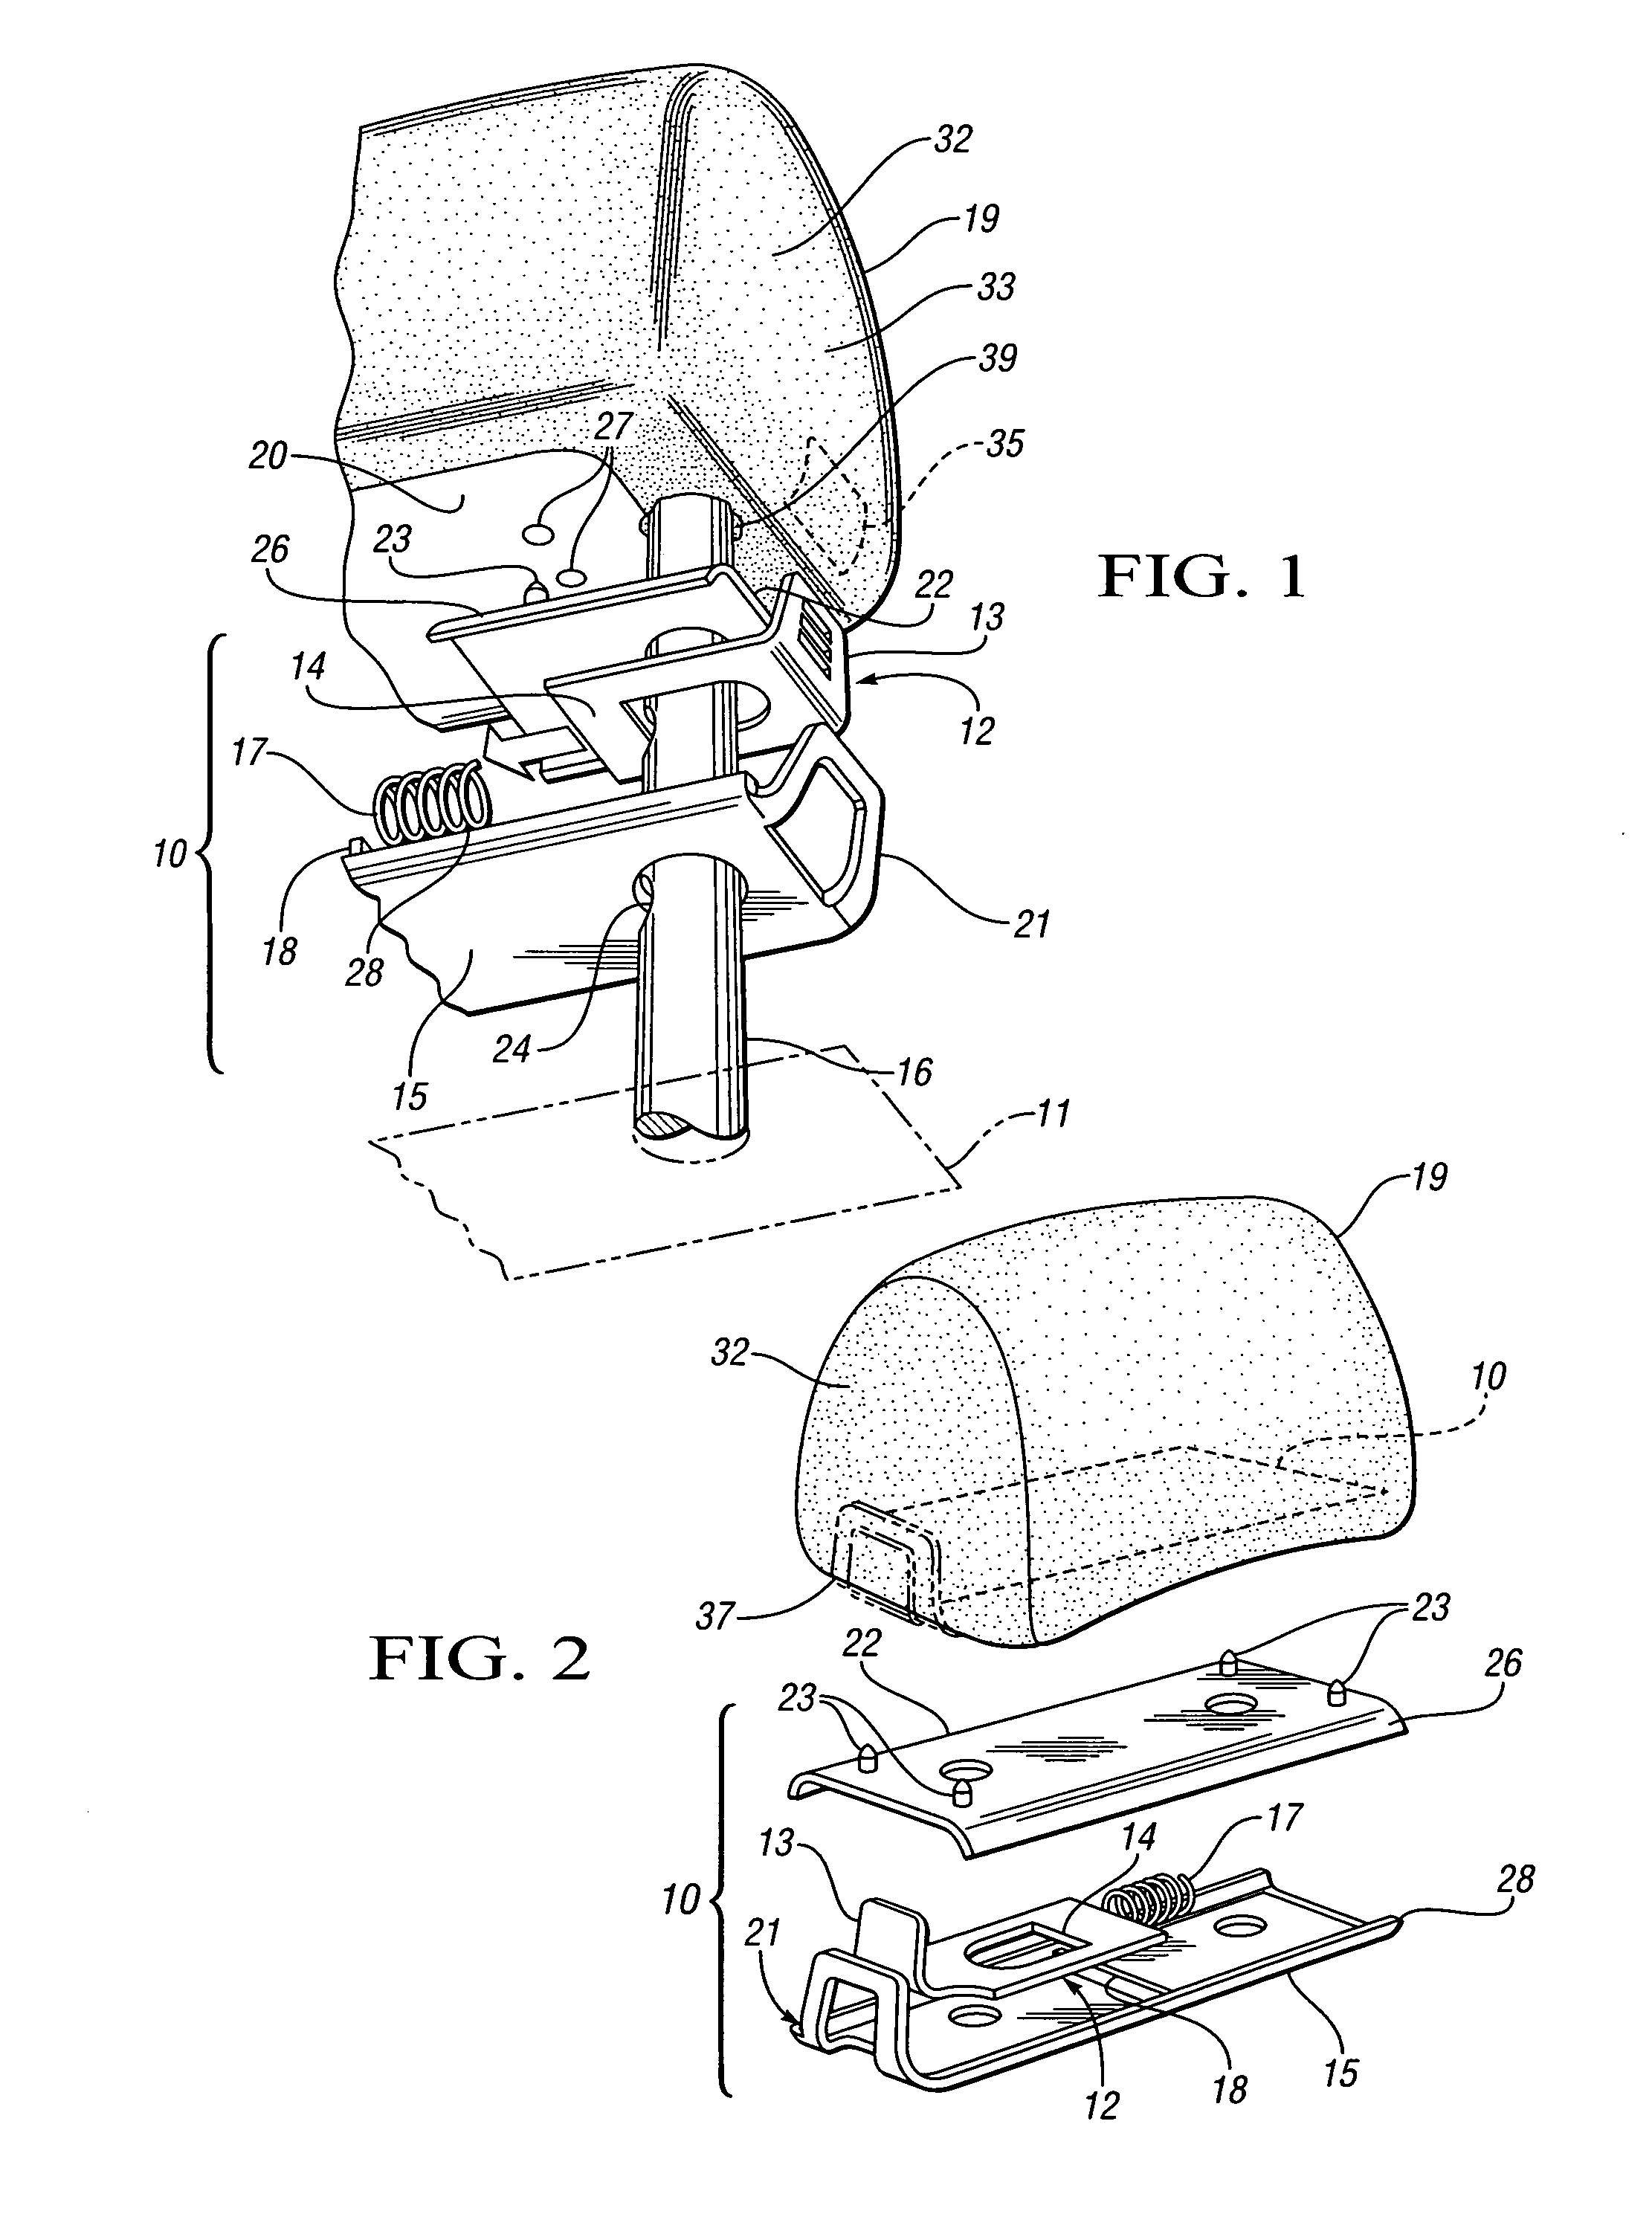 Head restraint adjustment and trim closeout apparatus and method